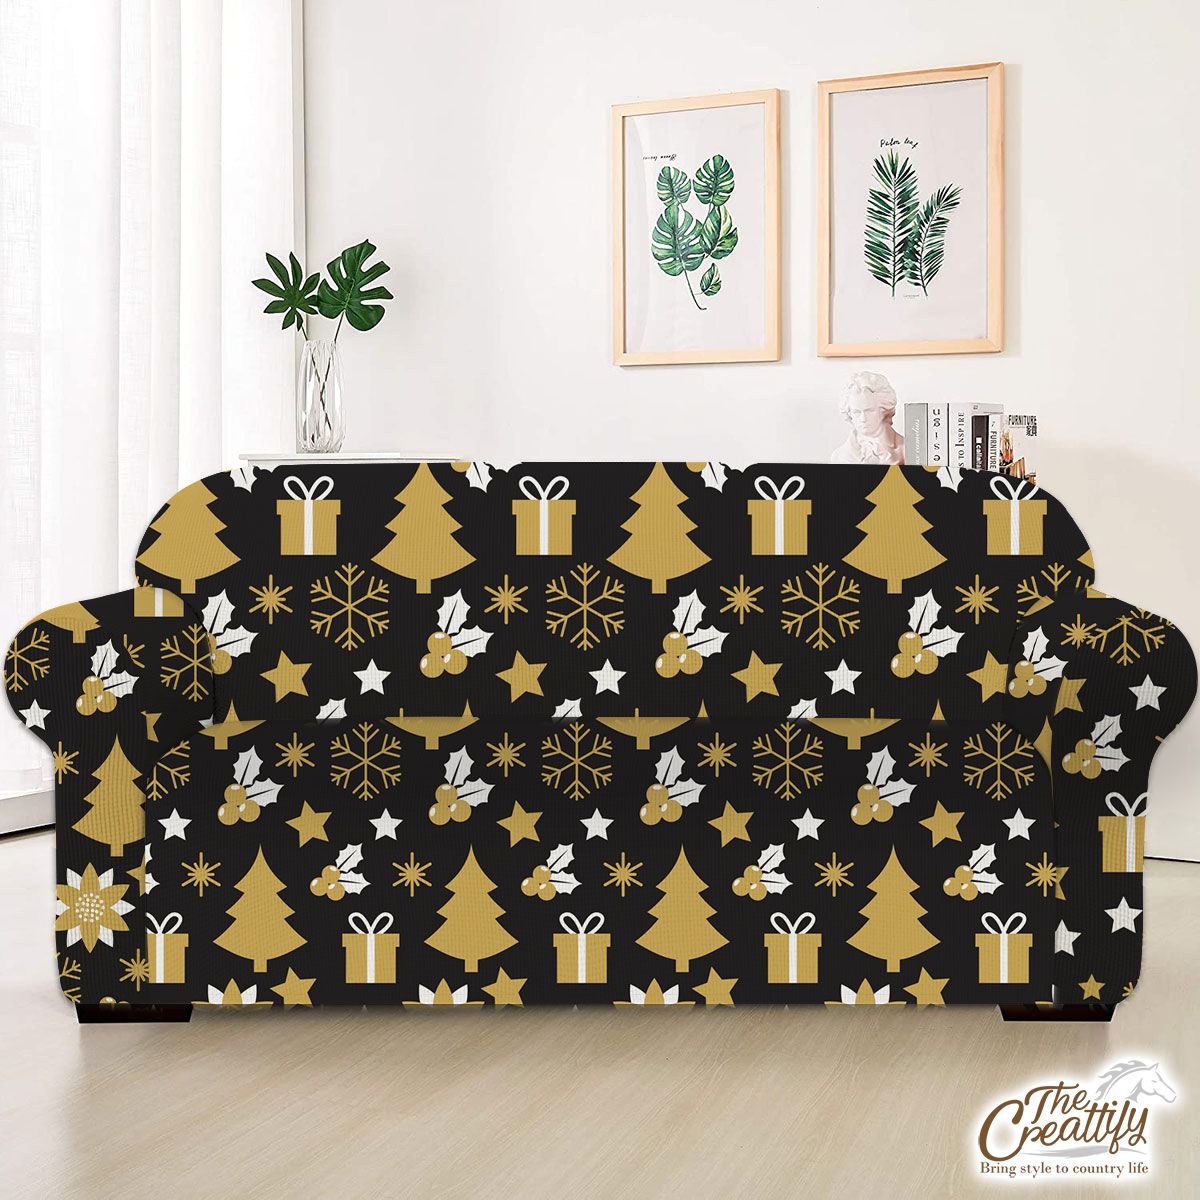 White And Gold Christmas Gift, Christmas Tree, Snowflake On Black Background Sofa Cover